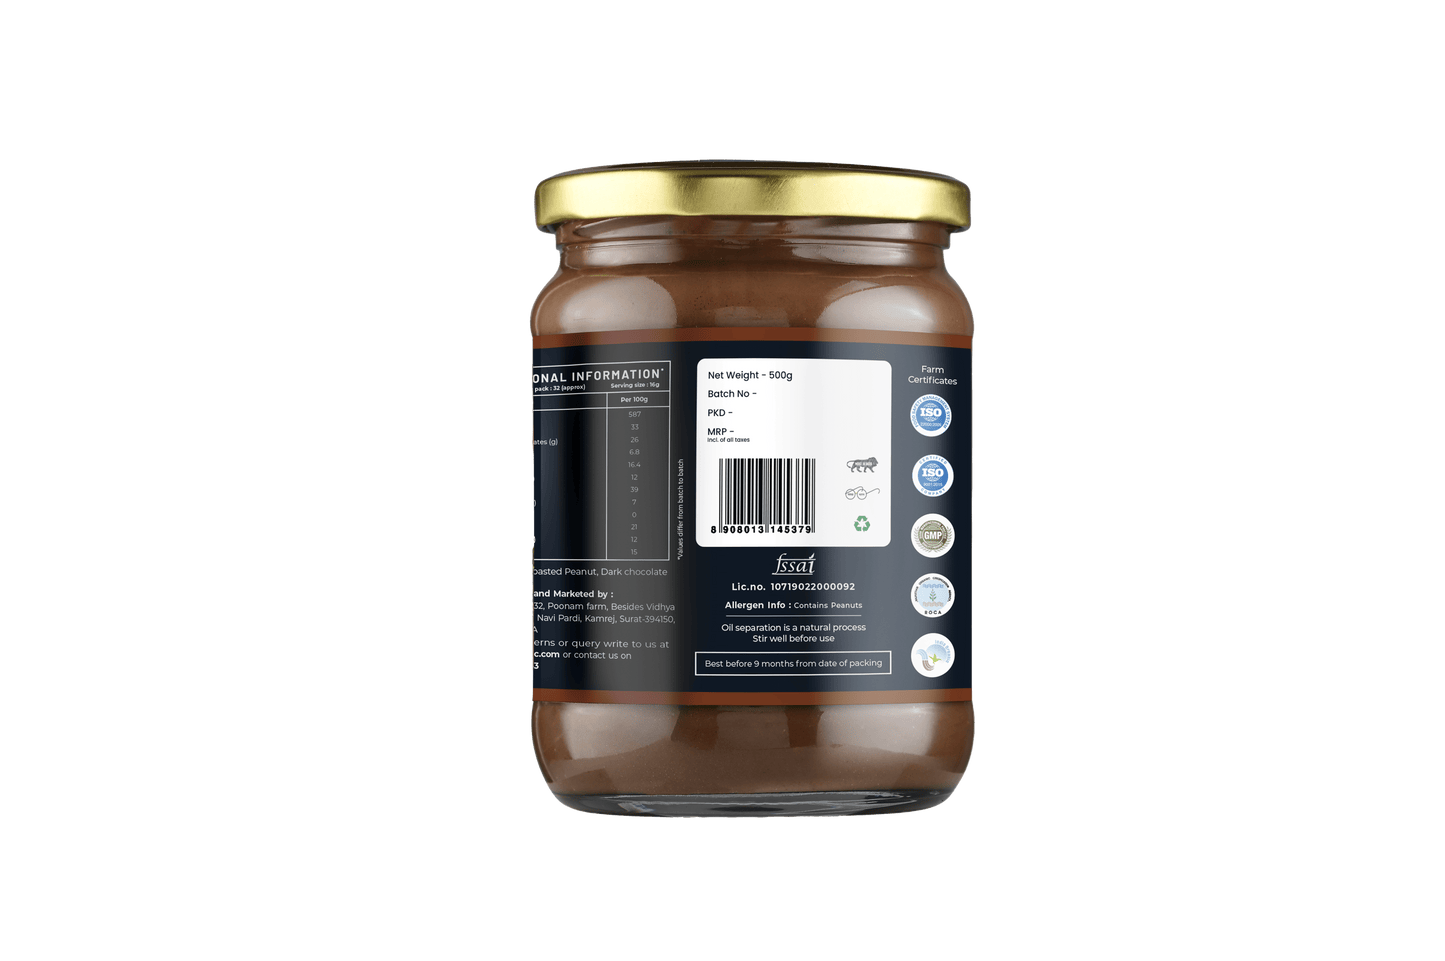 Chocolate Peanut Butter with Jaggery - 500 gram Stone Ground